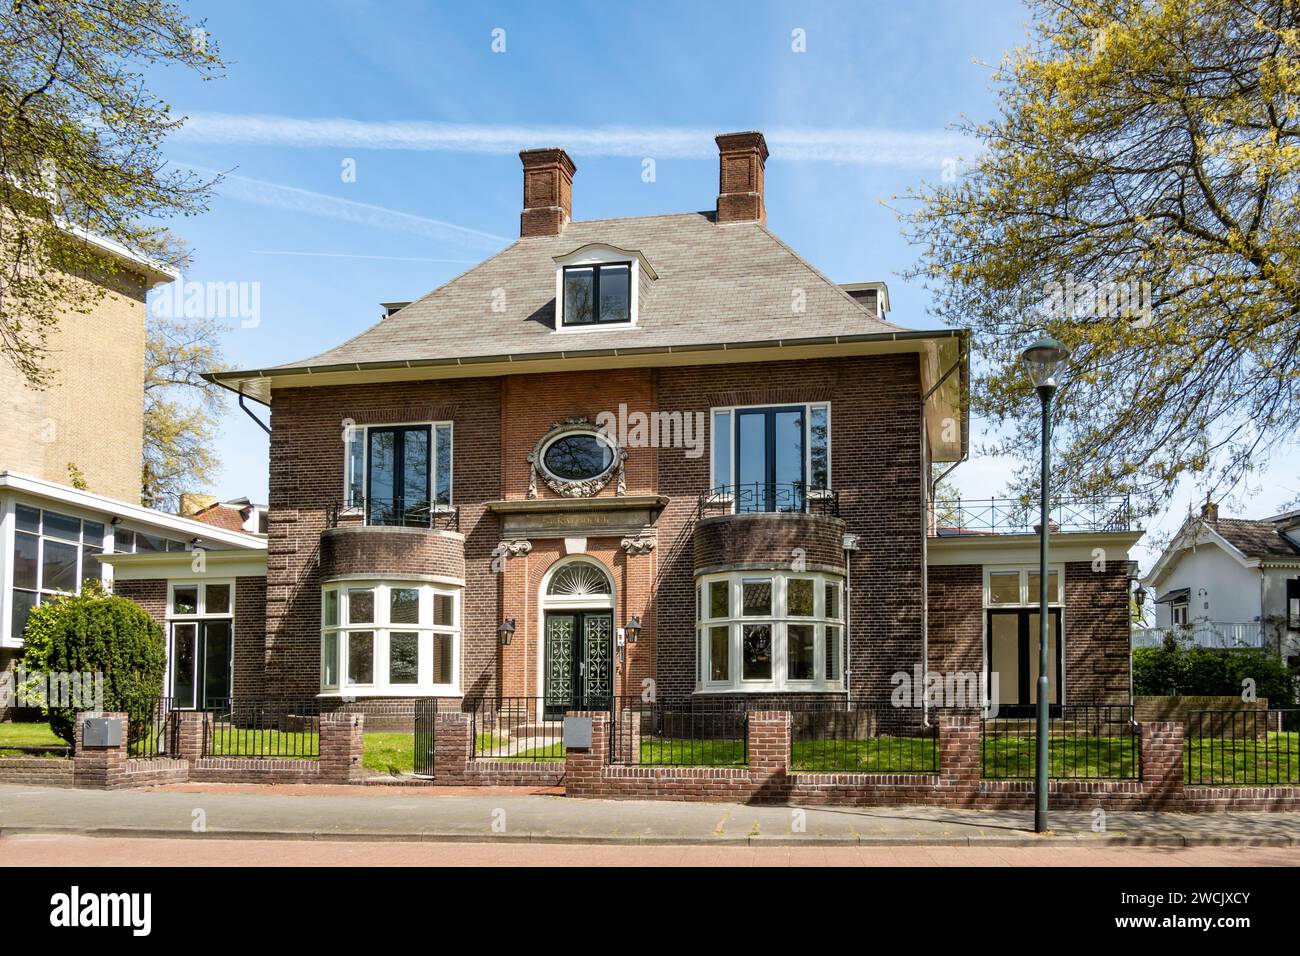 Villa 's-Gravenhoek designed by Jacob London in 1912, now in use as office, Hilversum, Netherlands Stock Photo